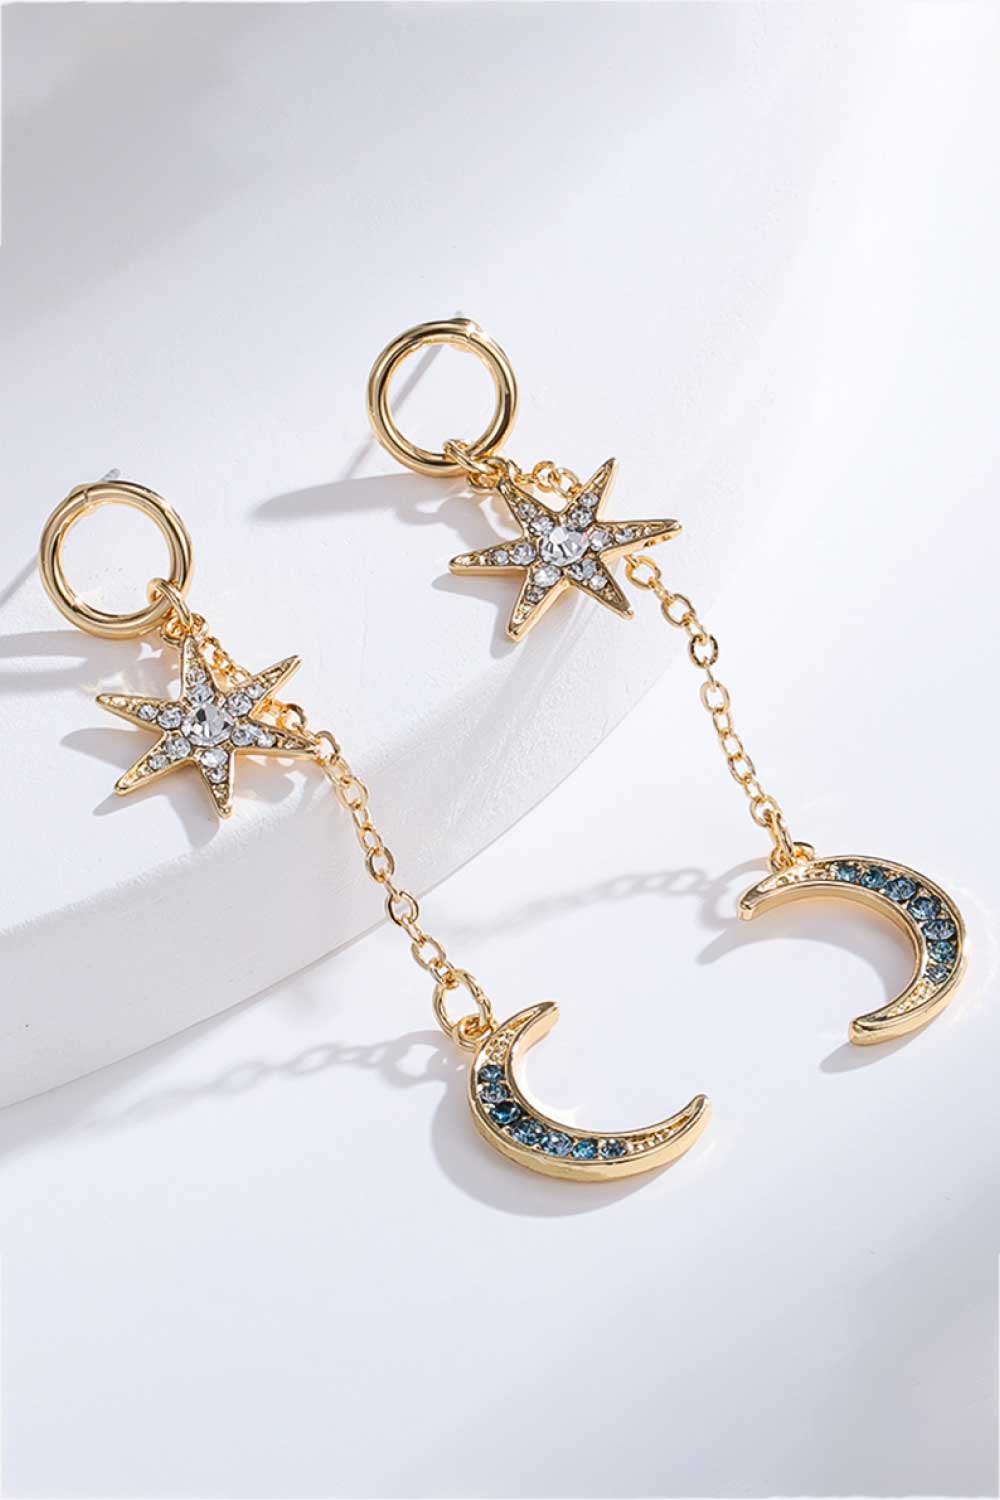 Inlaid Rhinestone Star and Moon Drop Earrings - Online Only